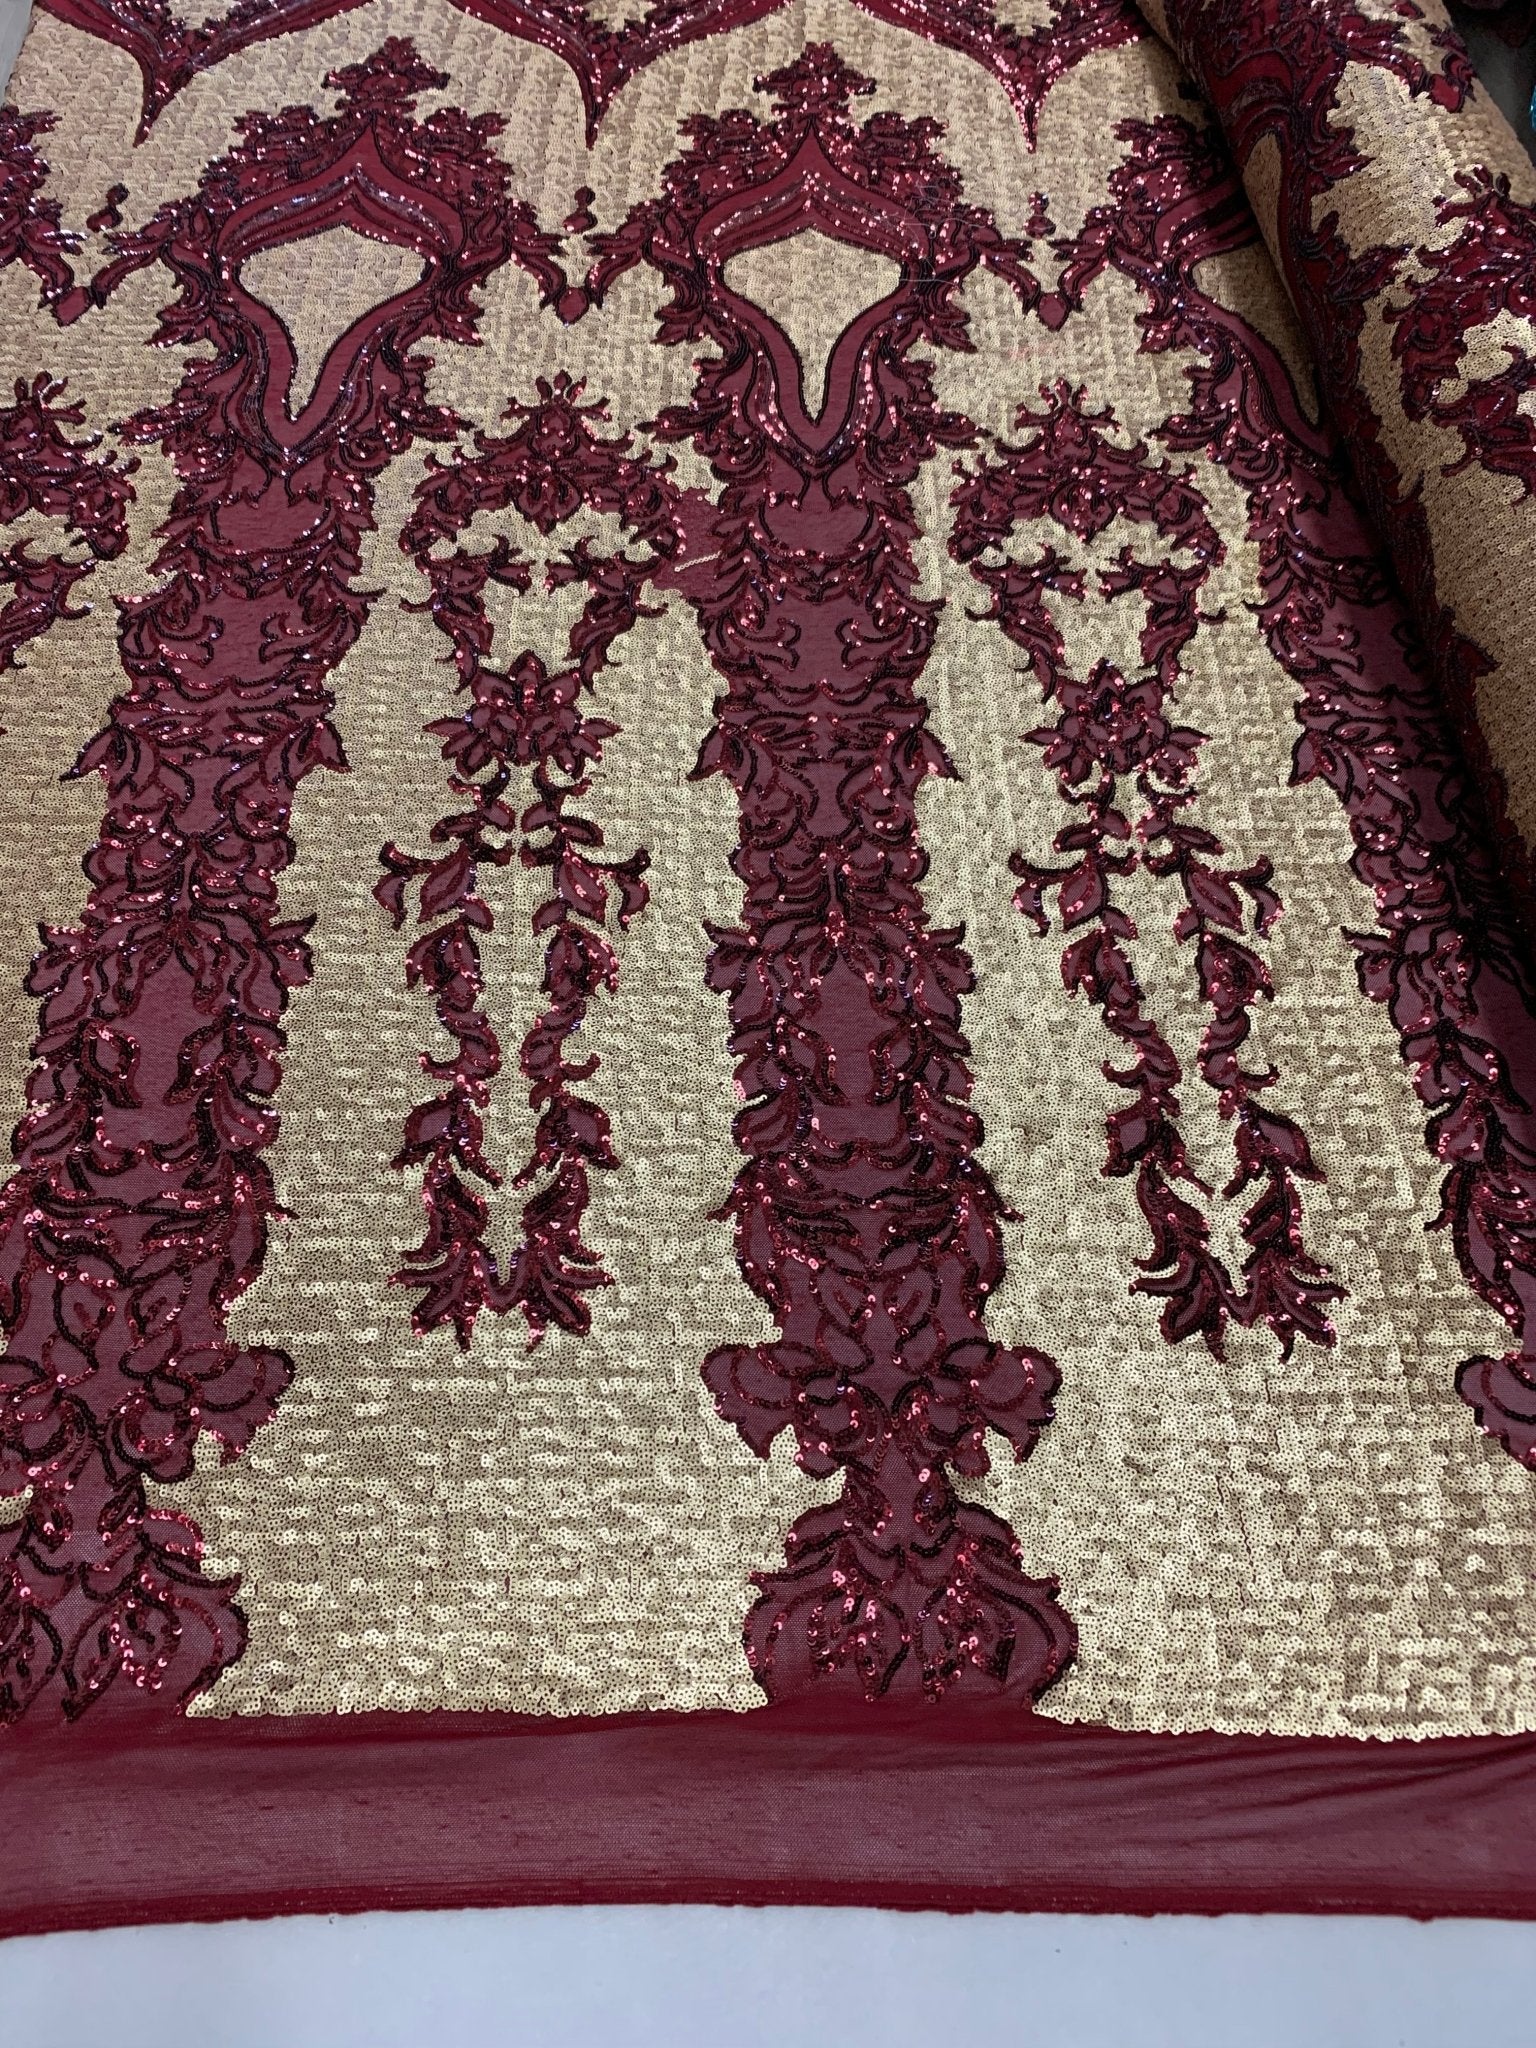 Burgundy_ Elegant 4 WAY Stretch Sequins On Power Mesh//Spandex Mesh Lace Sequins Fabric By The Yard//Embroidery Lace/ Gowns/Veil/ BridalICEFABRICICE FABRICS1/2 Yard (18 inches)Burgundy_ Elegant 4 WAY Stretch Sequins On Power Mesh//Spandex Mesh Lace Sequins Fabric By The Yard//Embroidery Lace/ Gowns/Veil/ Bridal ICEFABRIC